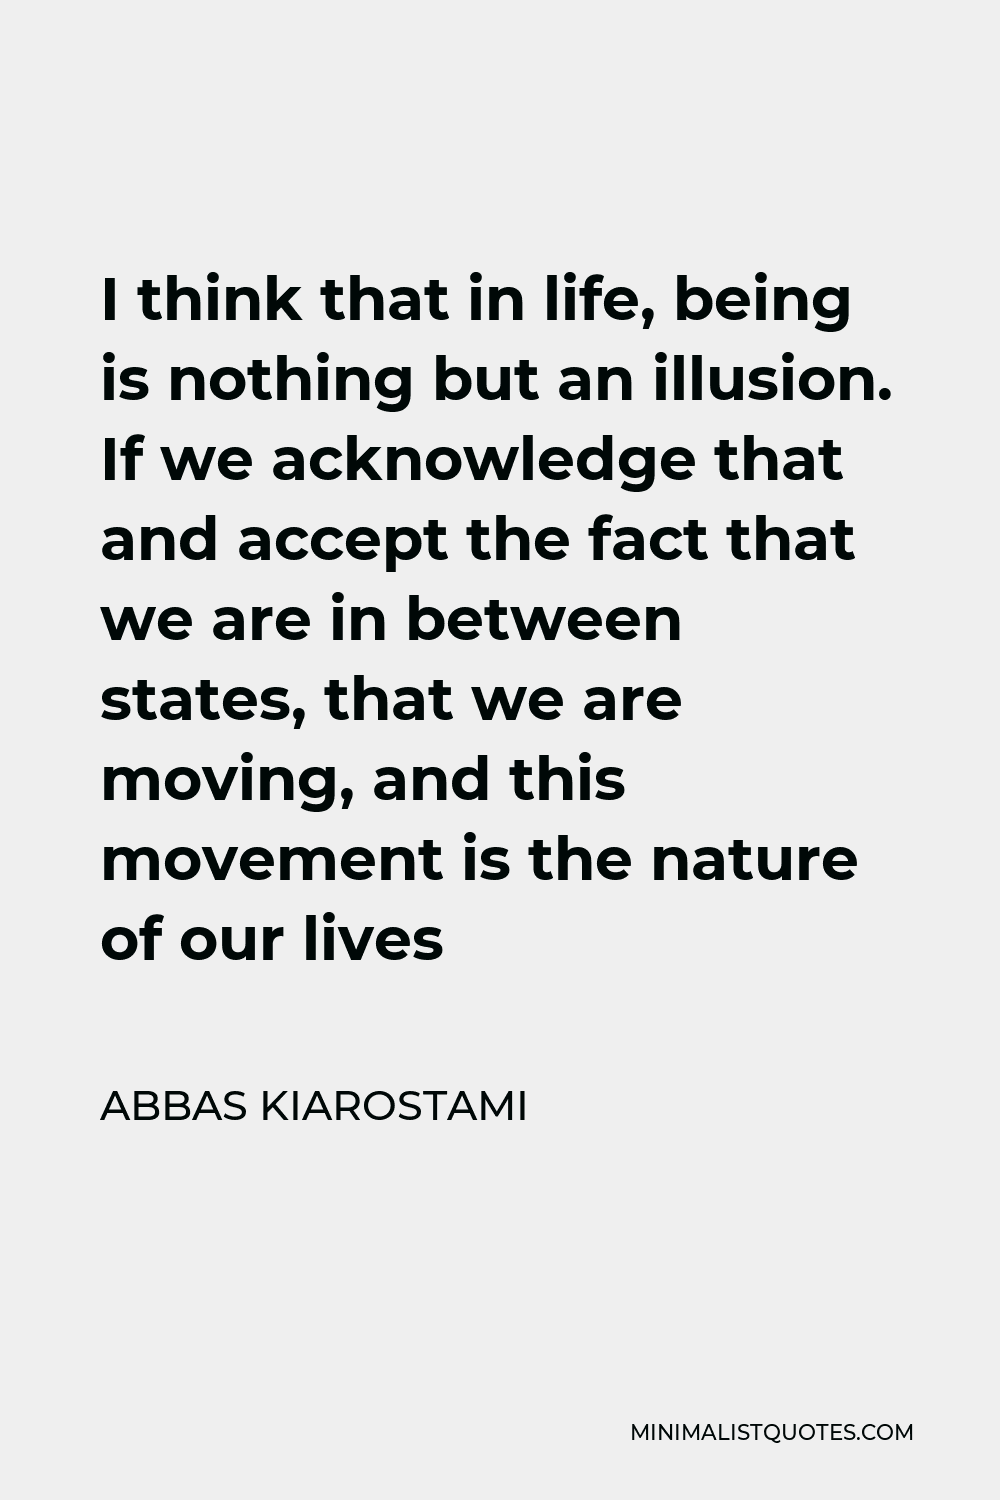 Abbas Kiarostami Quote - I think that in life, being is nothing but an illusion. If we acknowledge that and accept the fact that we are in between states, that we are moving, and this movement is the nature of our lives